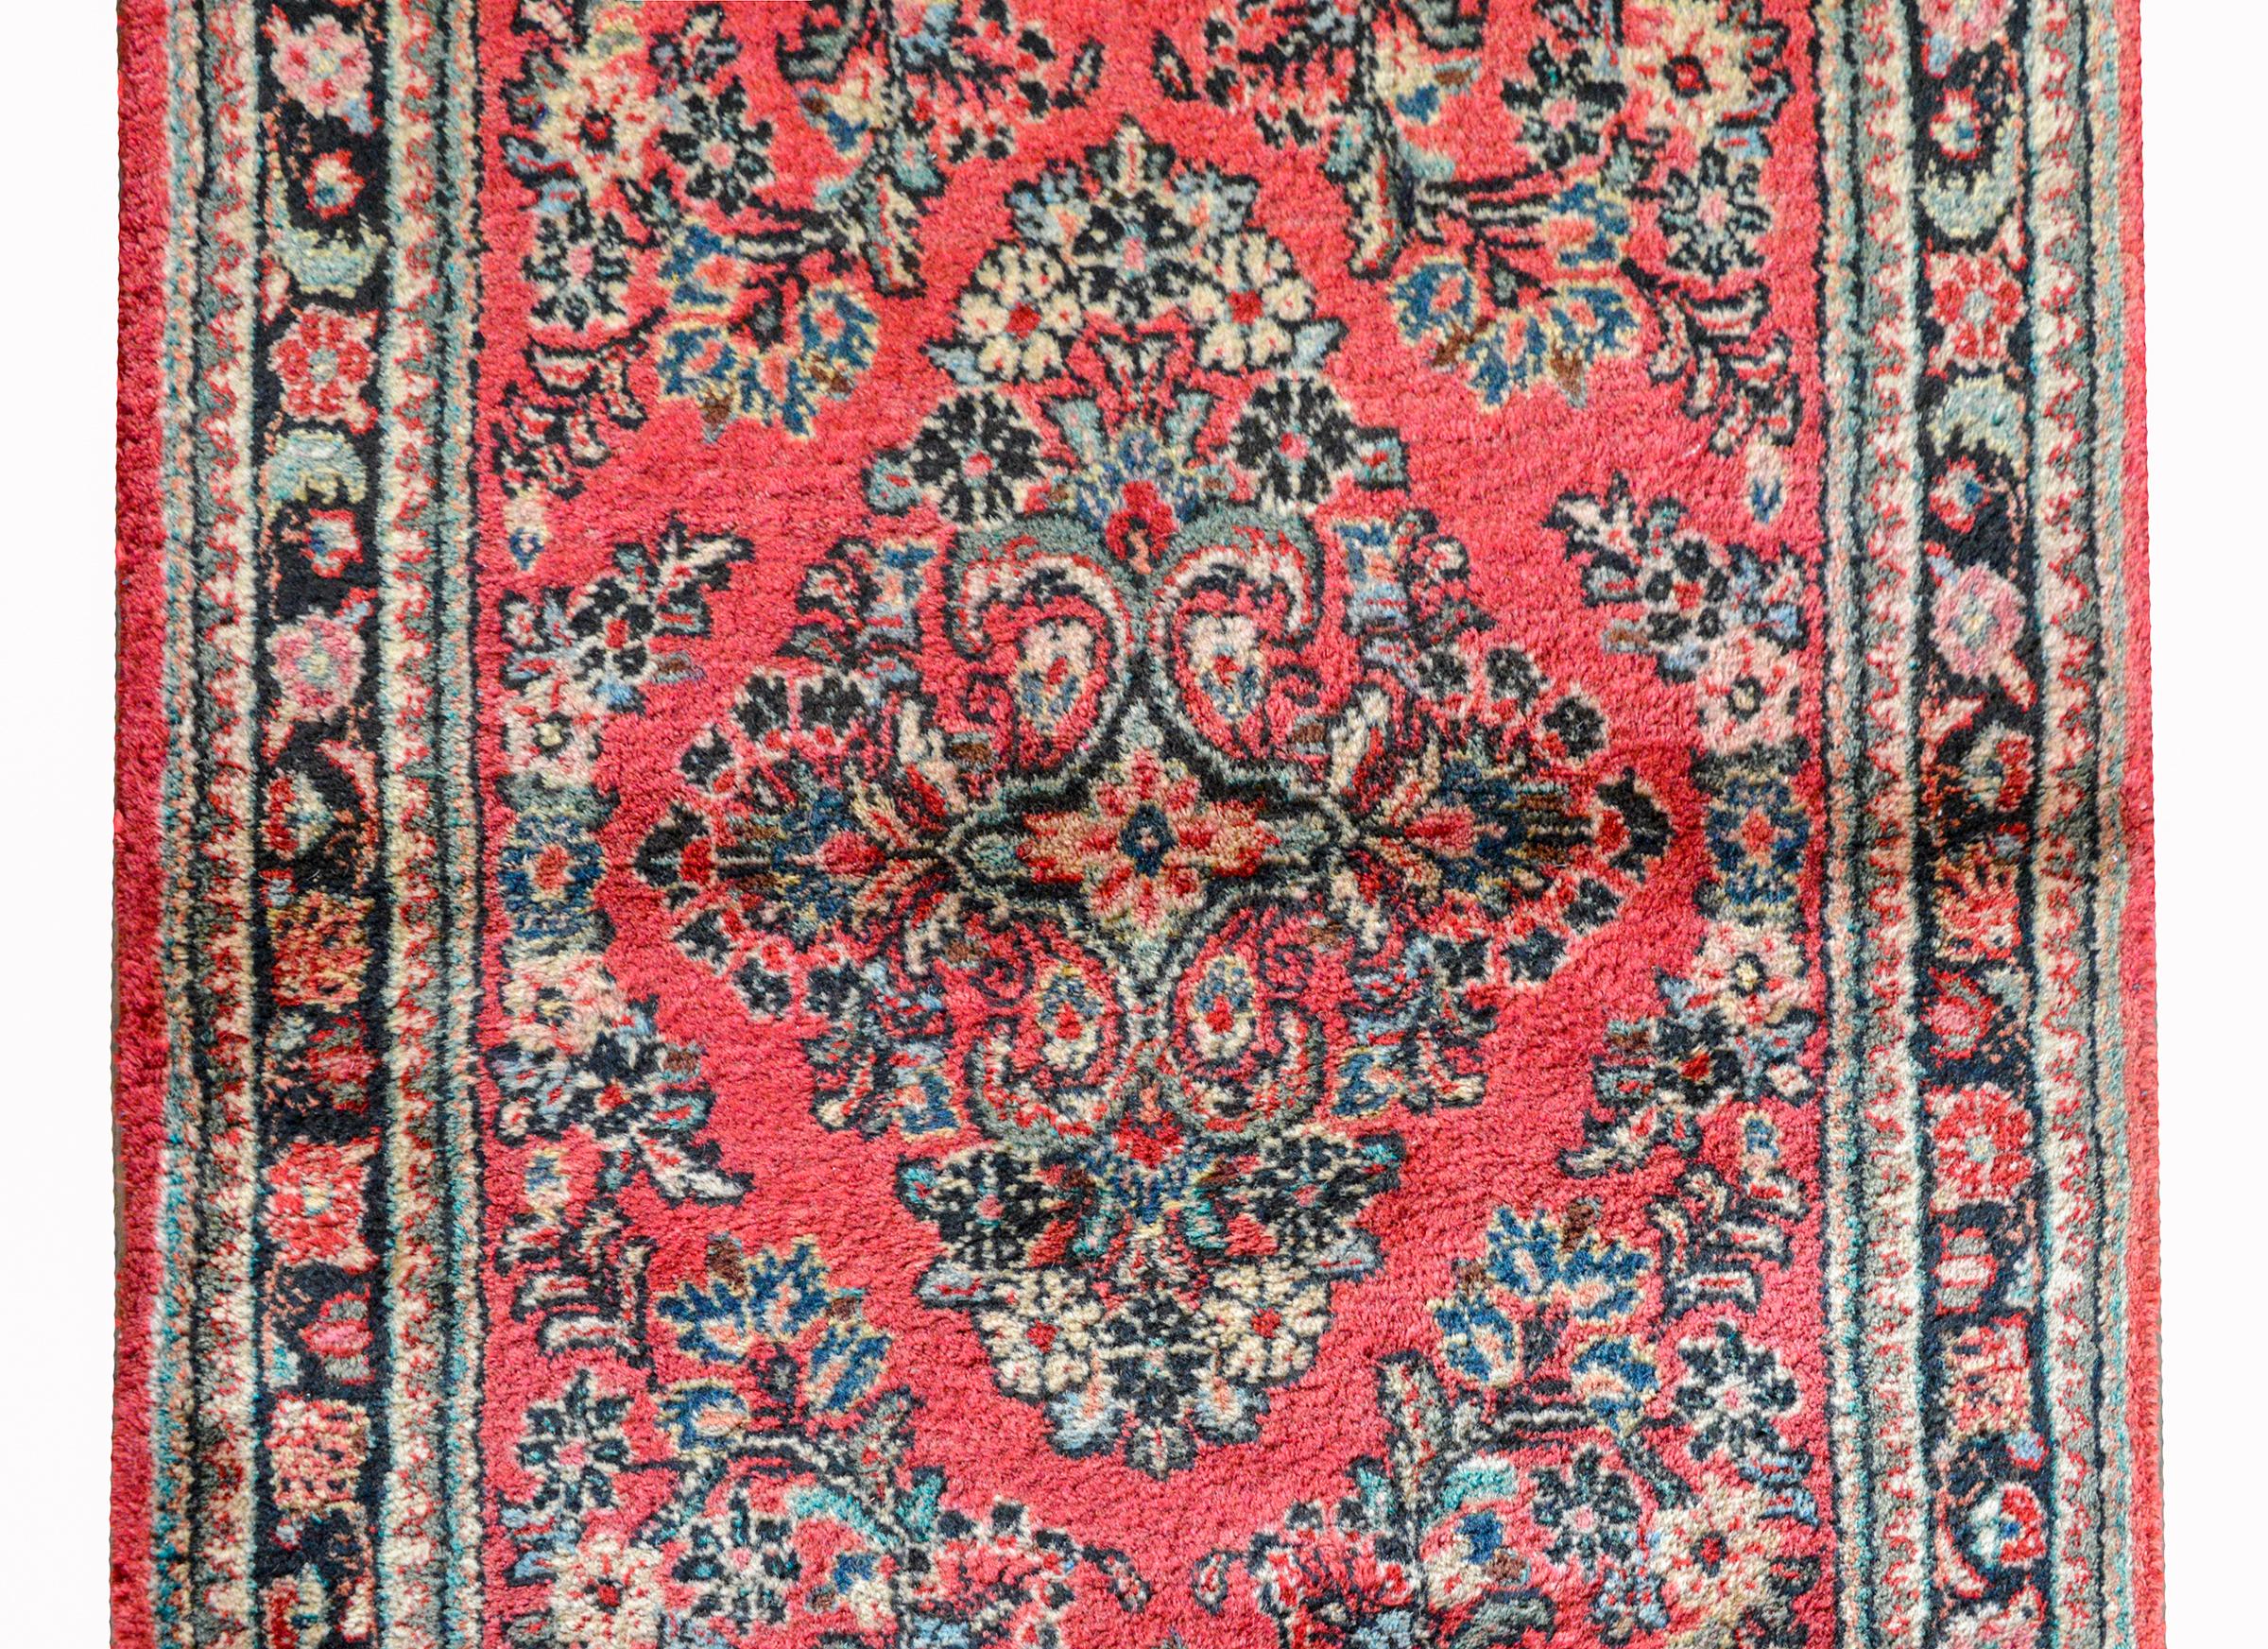 A wonderful early 20th century Persian Sarouk runner with a traditional all-over mirrored floral pattern woven in pink, indigo, and cream, set against a dark cranberry background and surrounded by multiple petite floral patterned stripes.